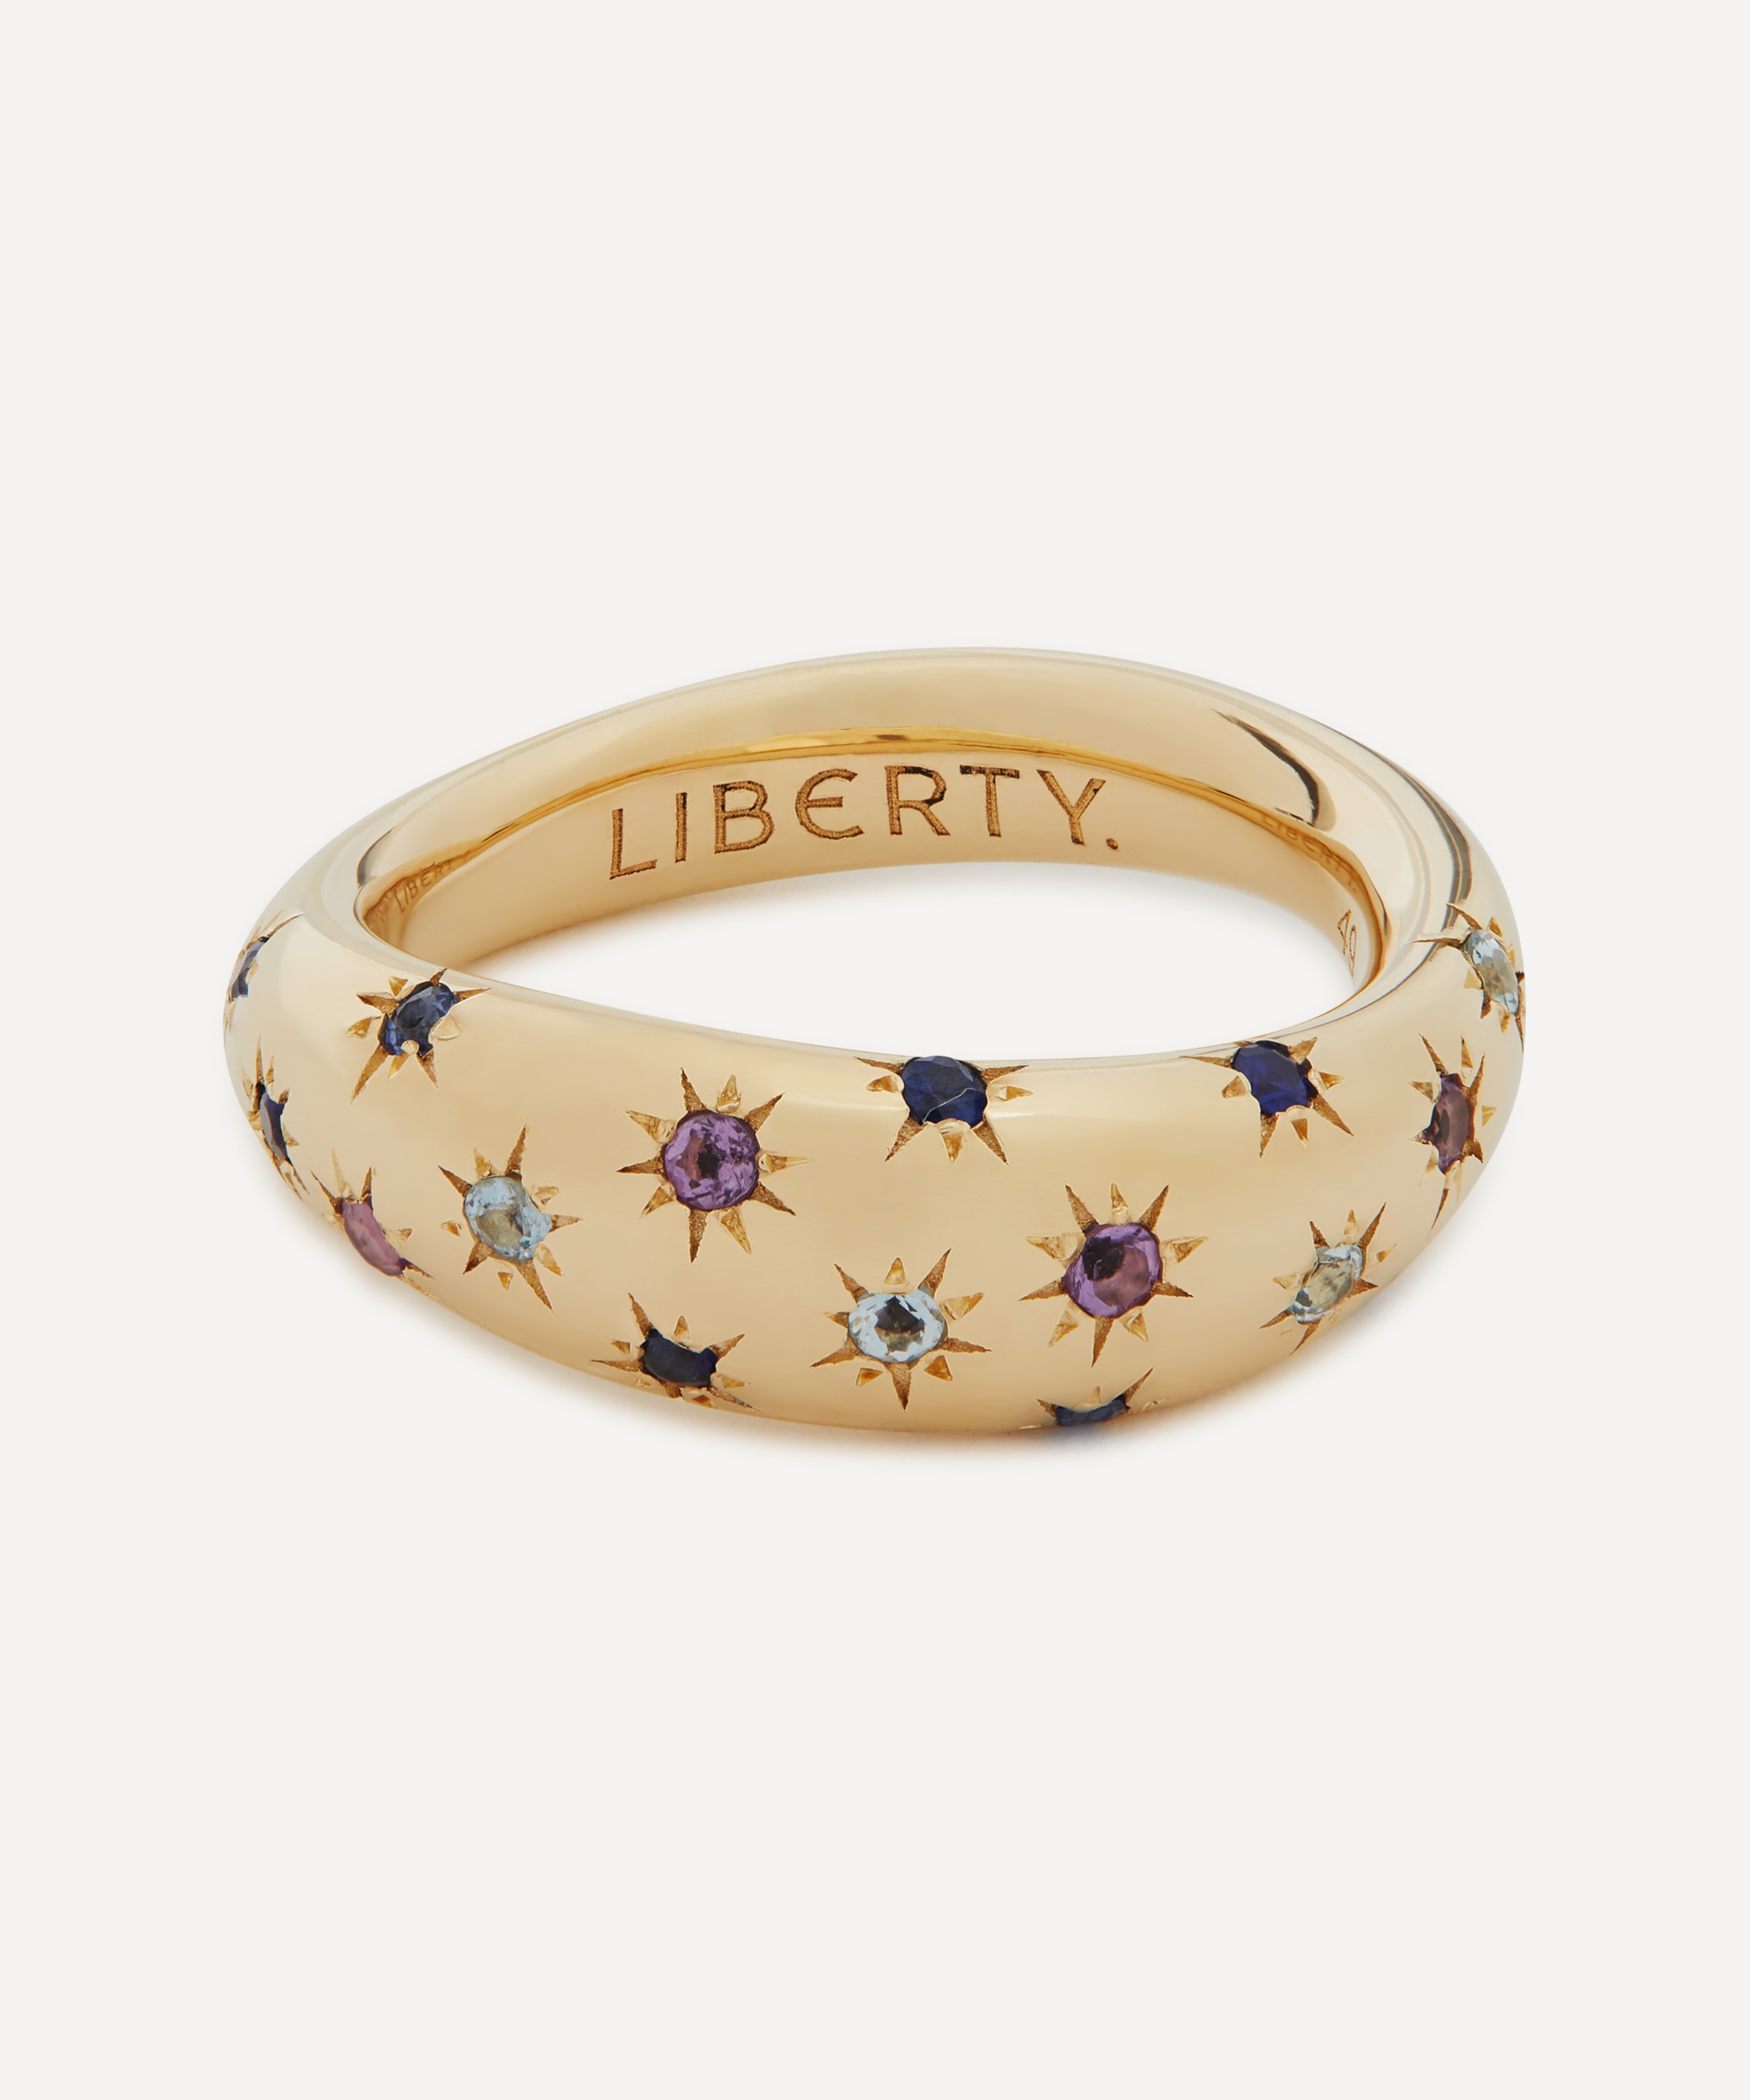 Colour Blossom Mini Star Ring, White Gold, Grey Mother-Of-Pearl